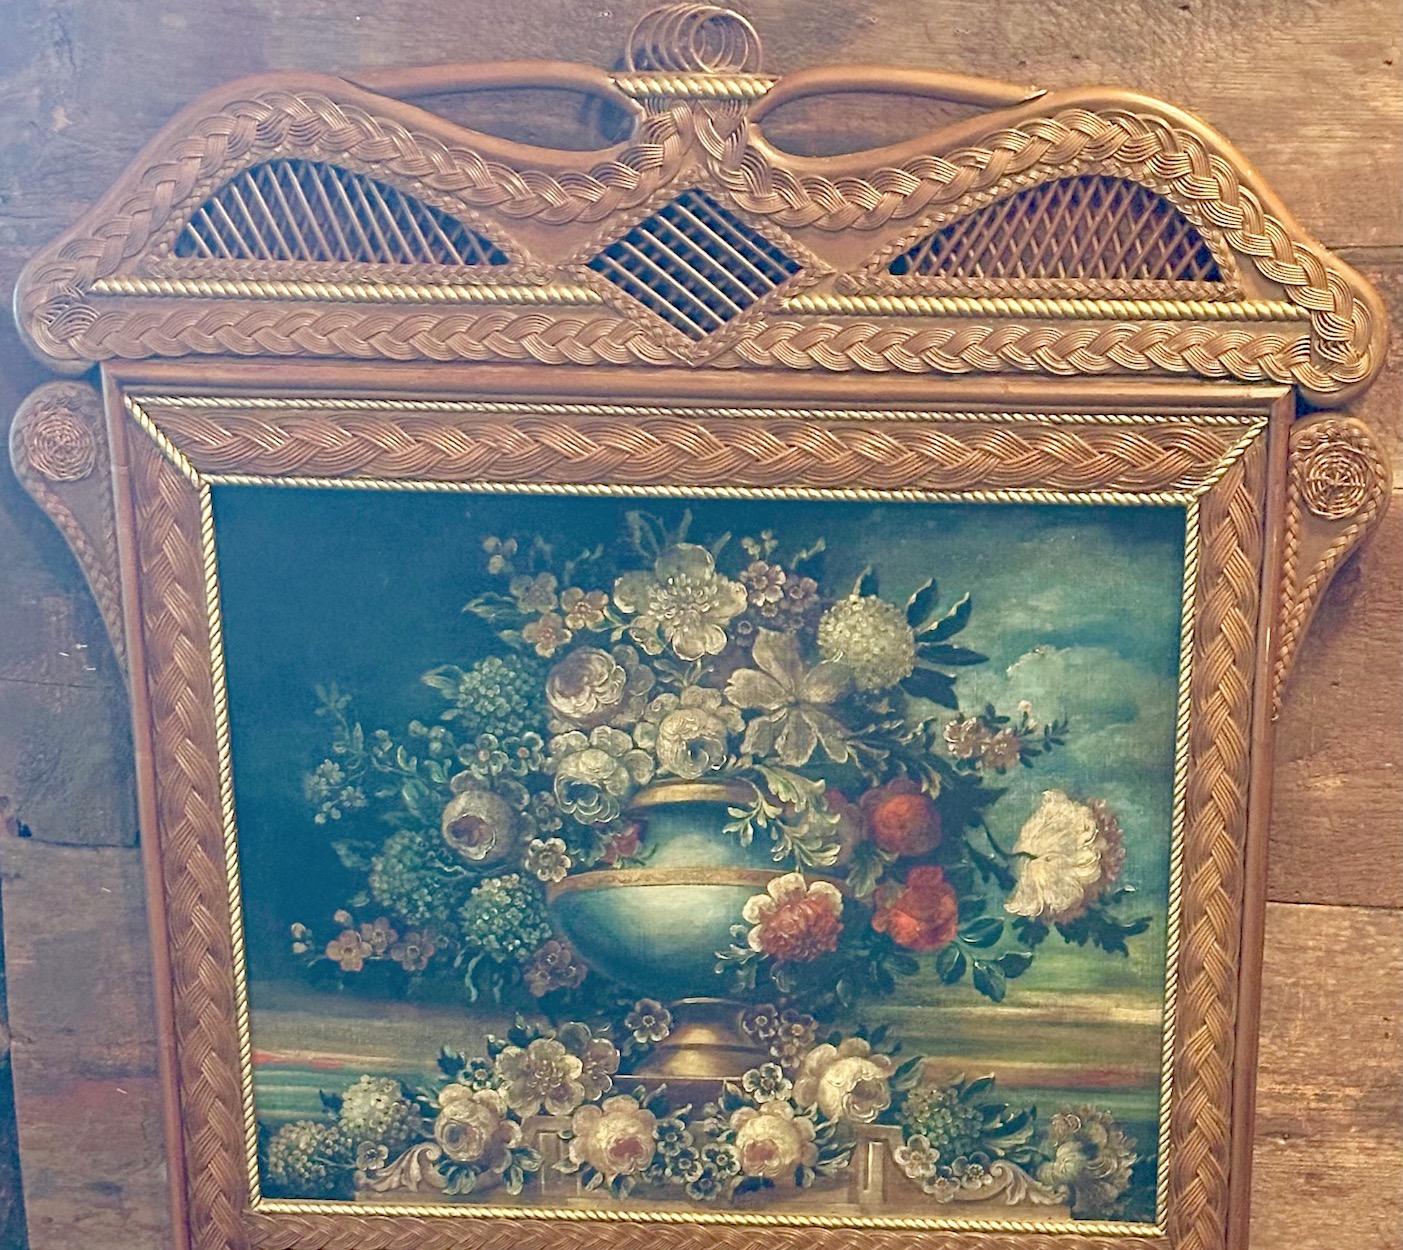 20th Century A  Rare Wicker Framed Trumeau Mirror with Oil on Canvas Floral Still Life